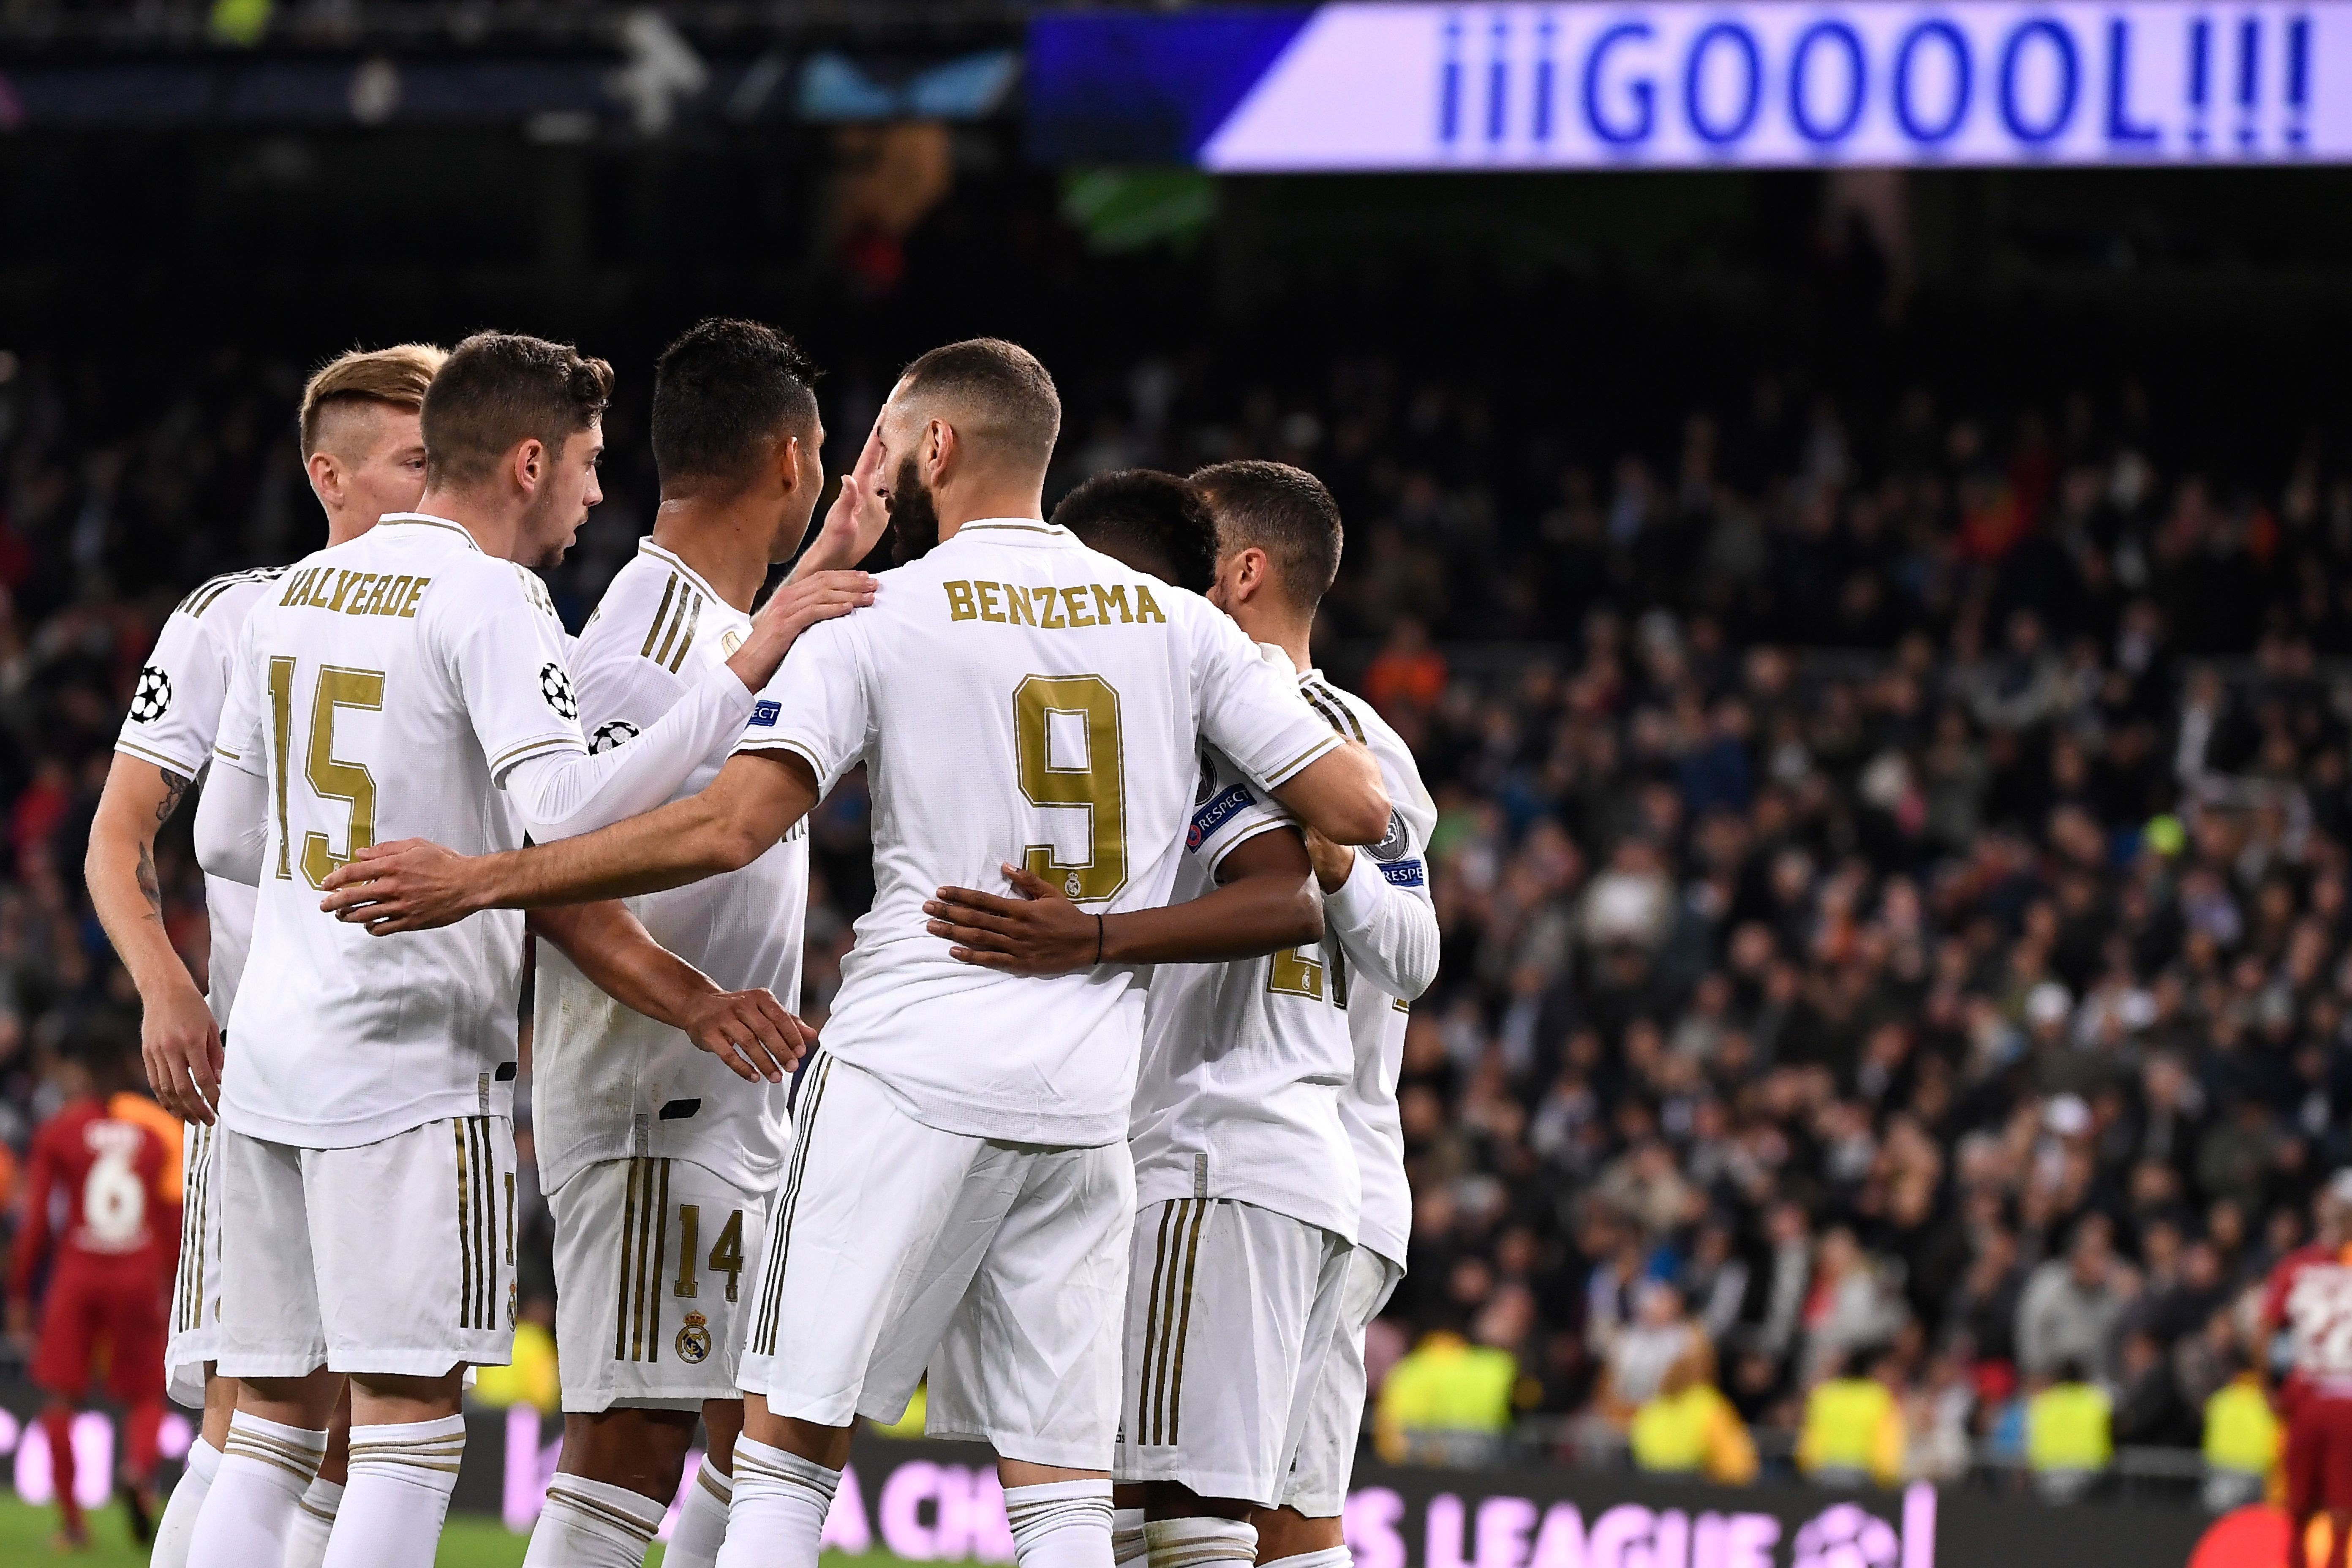 Real Madrid's French forward Karim Benzema (C) celebrates with teammates after scoring during the UEFA Champions League Group A football match between Real Madrid and Galatasaray at the Santiago Bernabeu stadium in Madrid, on November 6, 2019. (Photo by PIERRE-PHILIPPE MARCOU / AFP) (Photo by PIERRE-PHILIPPE MARCOU/AFP via Getty Images)